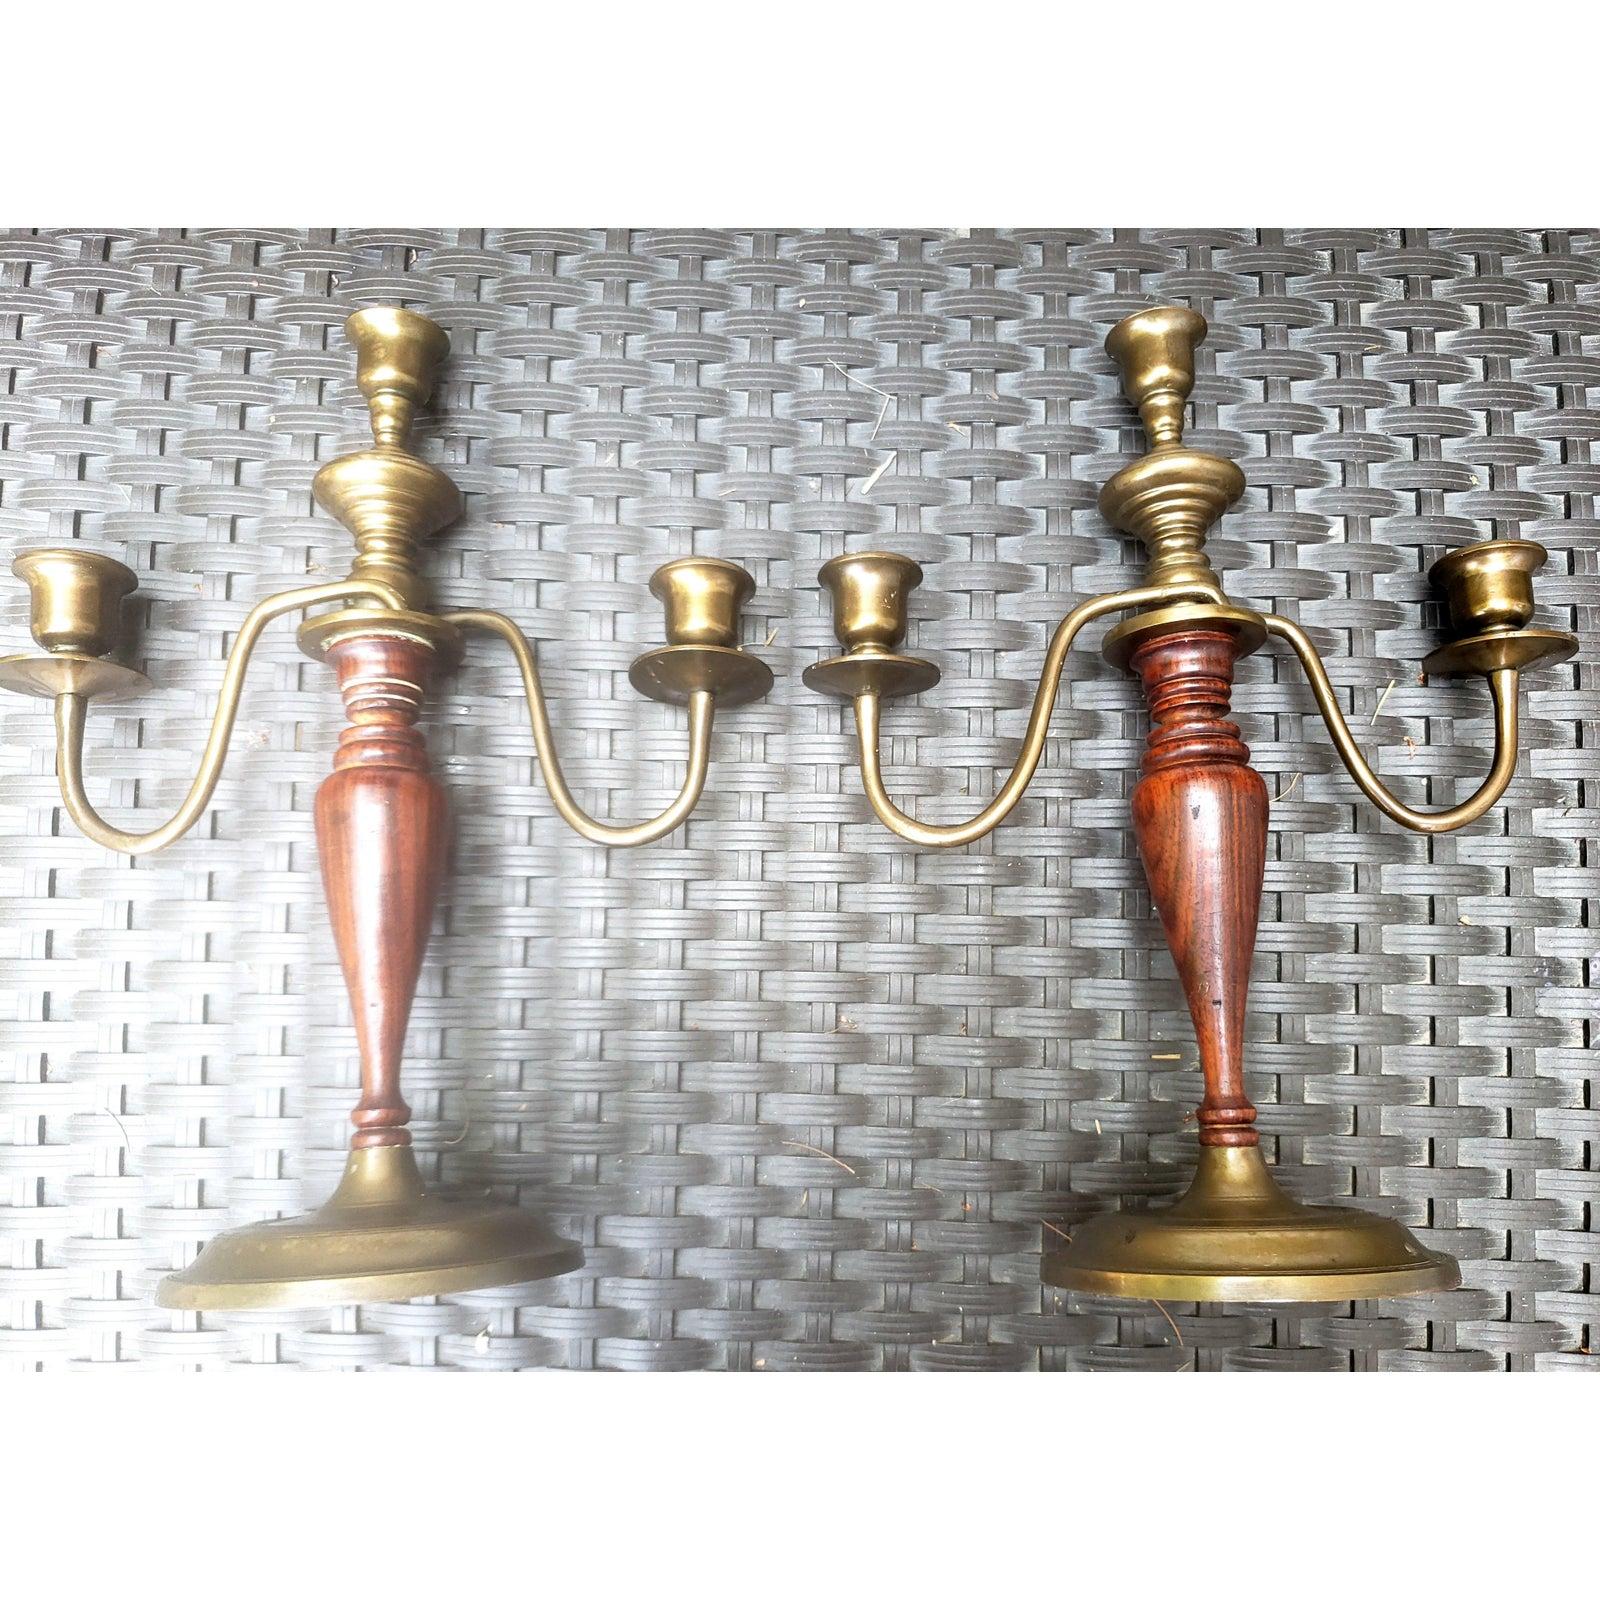 19th Century Mahogany and Brass Candelabras, a Pair For Sale 2